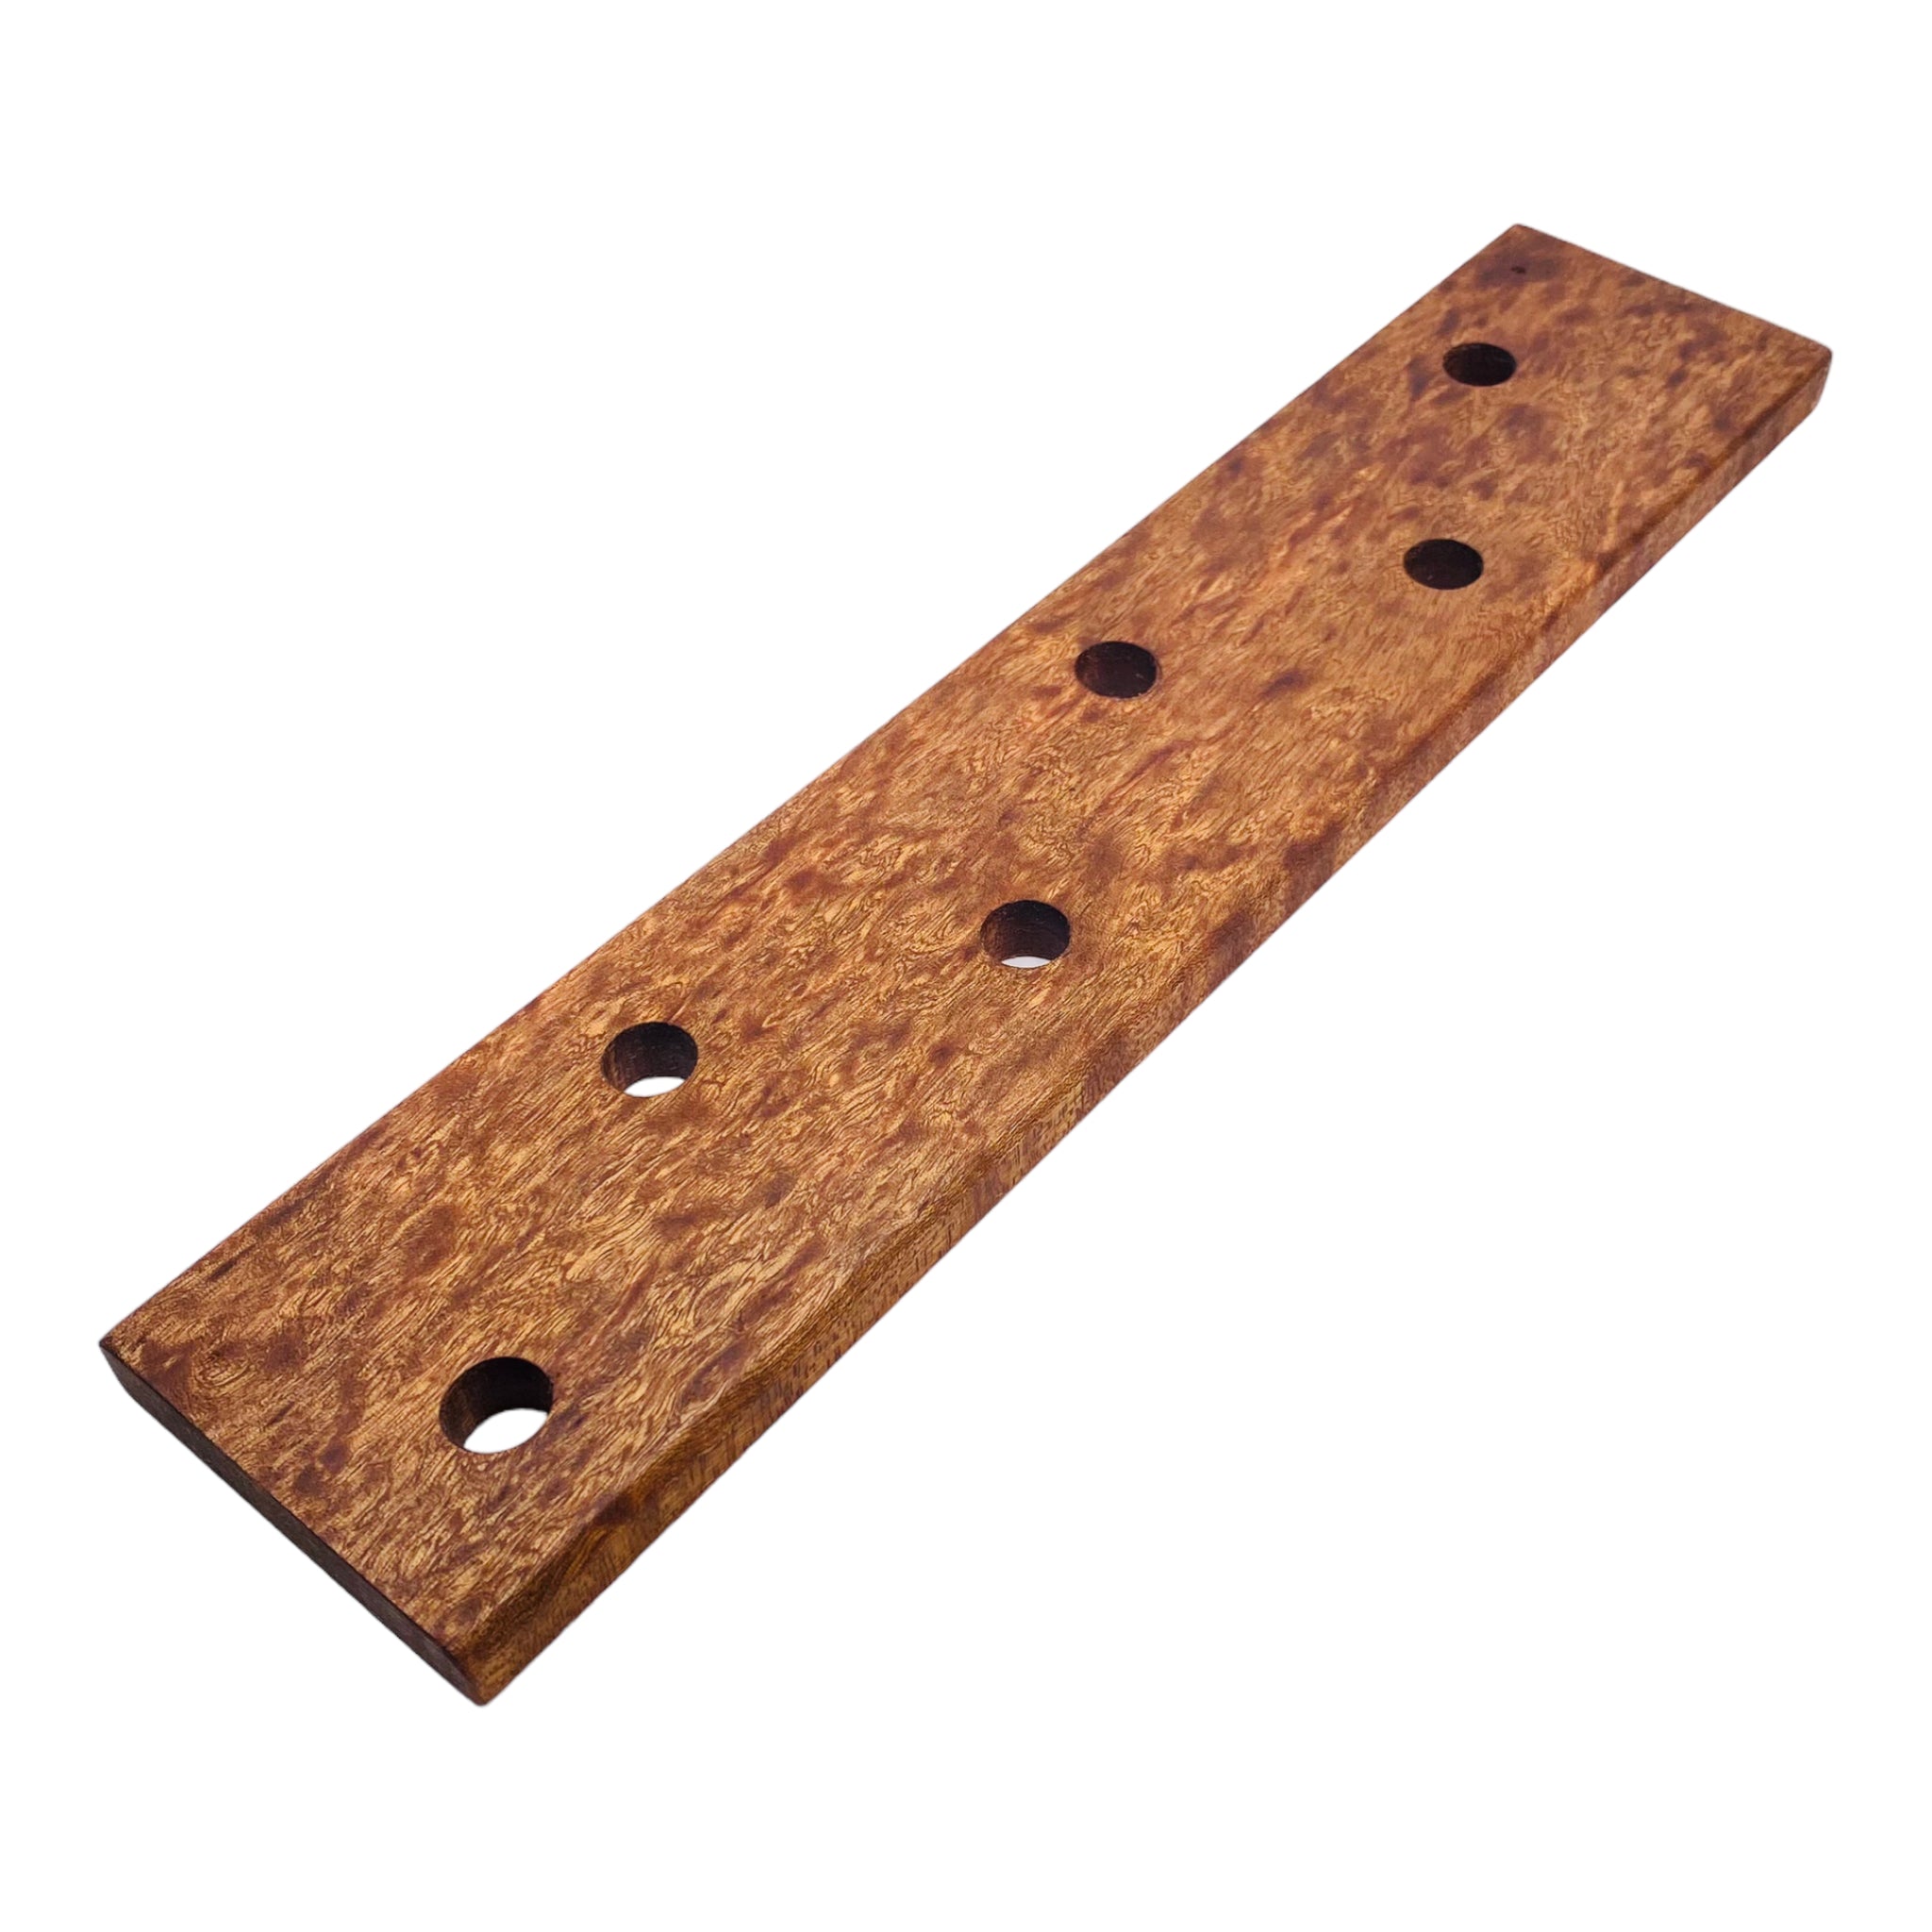 6 Hole Wood Display Stand Holder For 14mm Bong Bowl Pieces Or Quartz Bangers - Mahogany Lace Burl